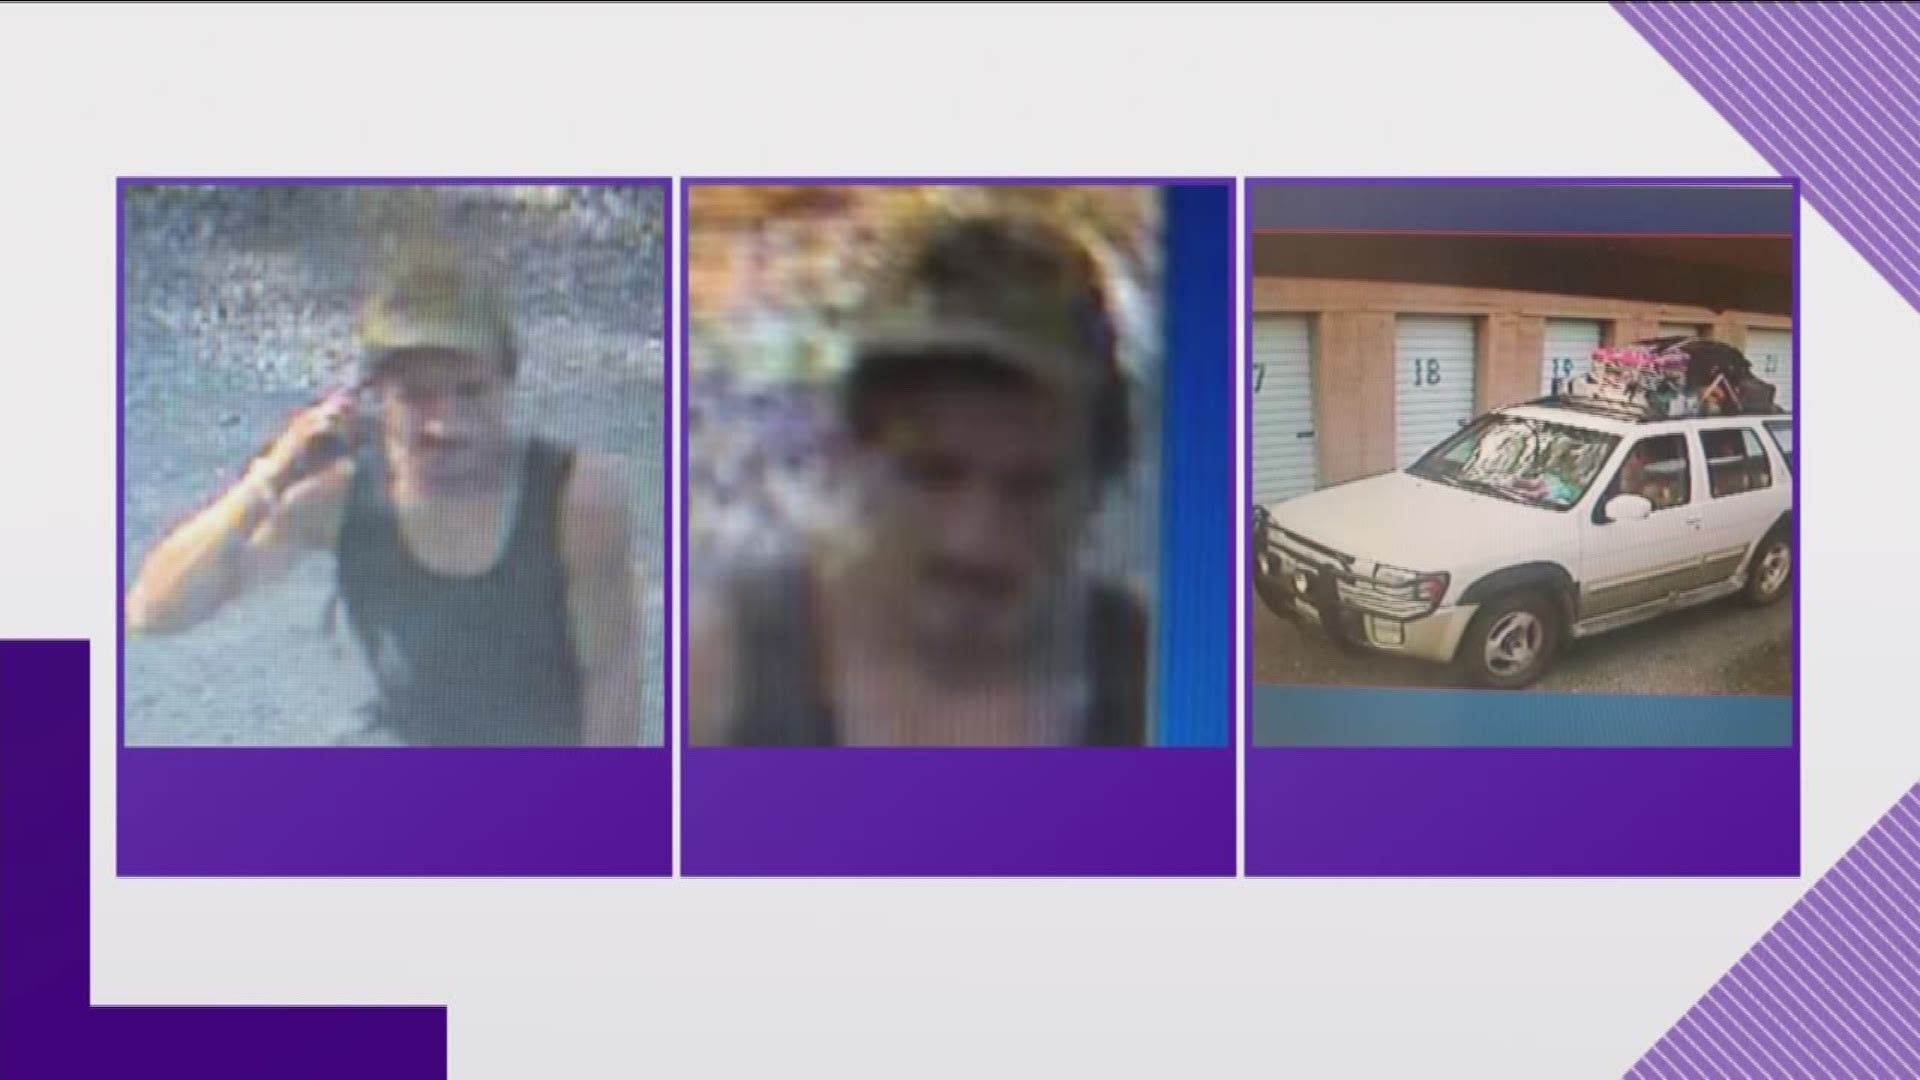 Lonoke Police want your help finding the person responsible for breaking into multiple storage buildings in the area.